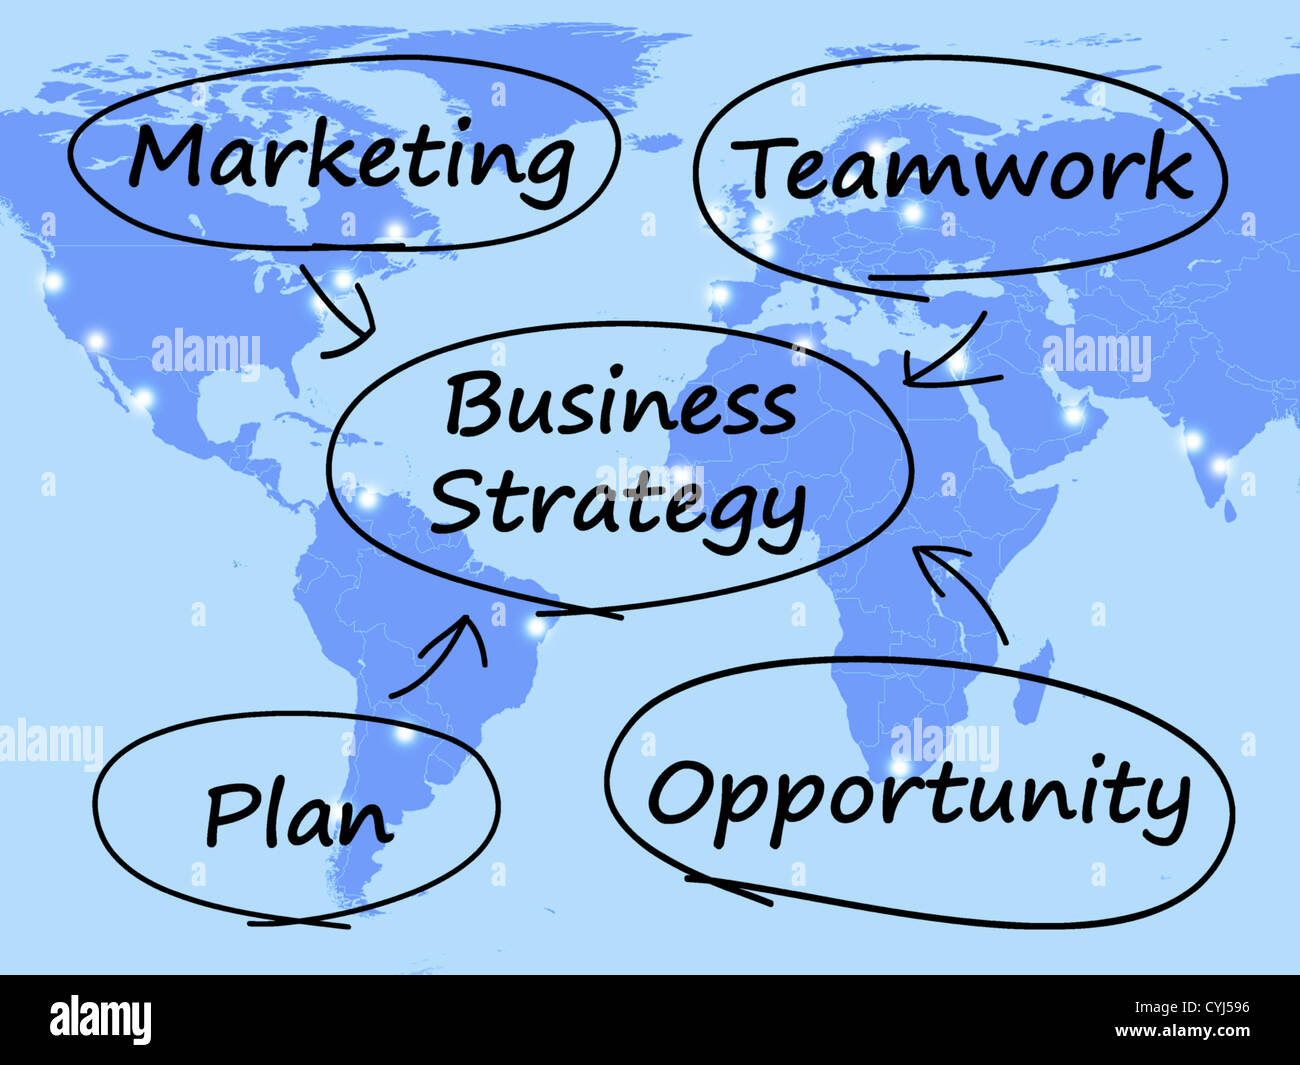 Business Strategy Diagram Shows Teamwork And Plan Stock Photo